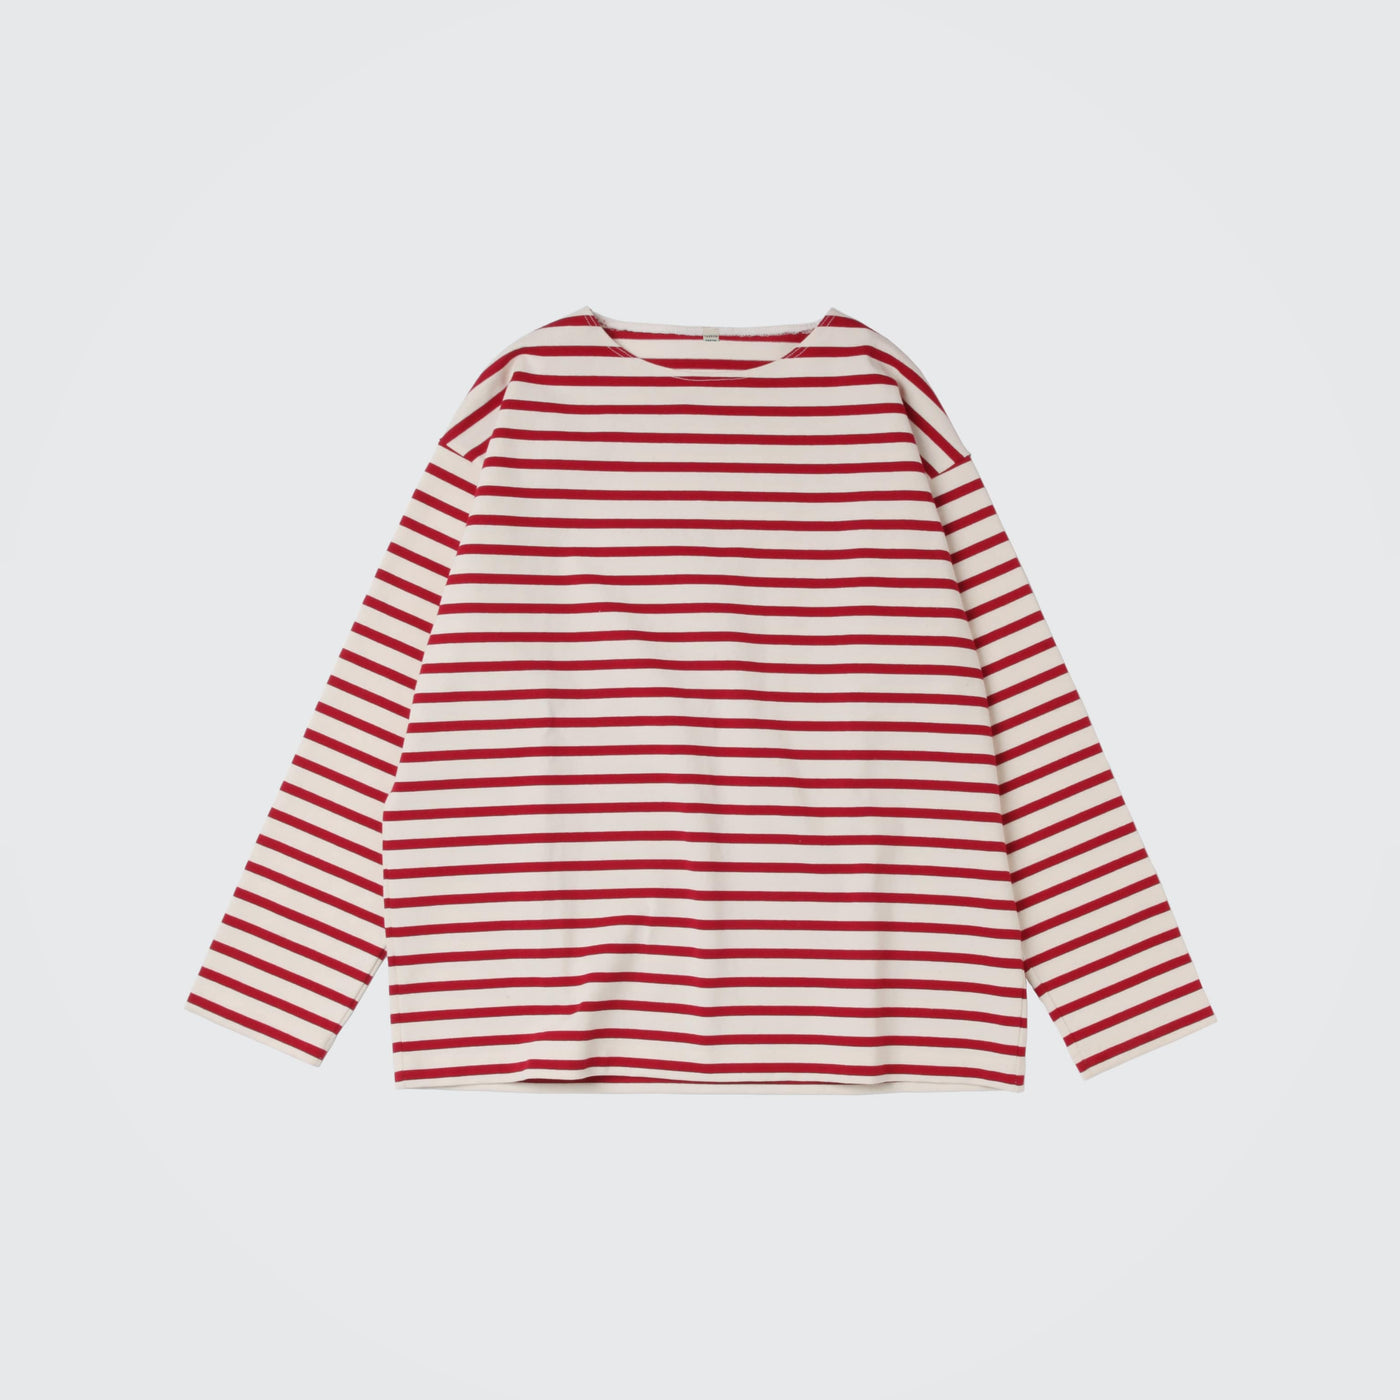 PREMIER H. WEIGHT BORDER L/S TEE